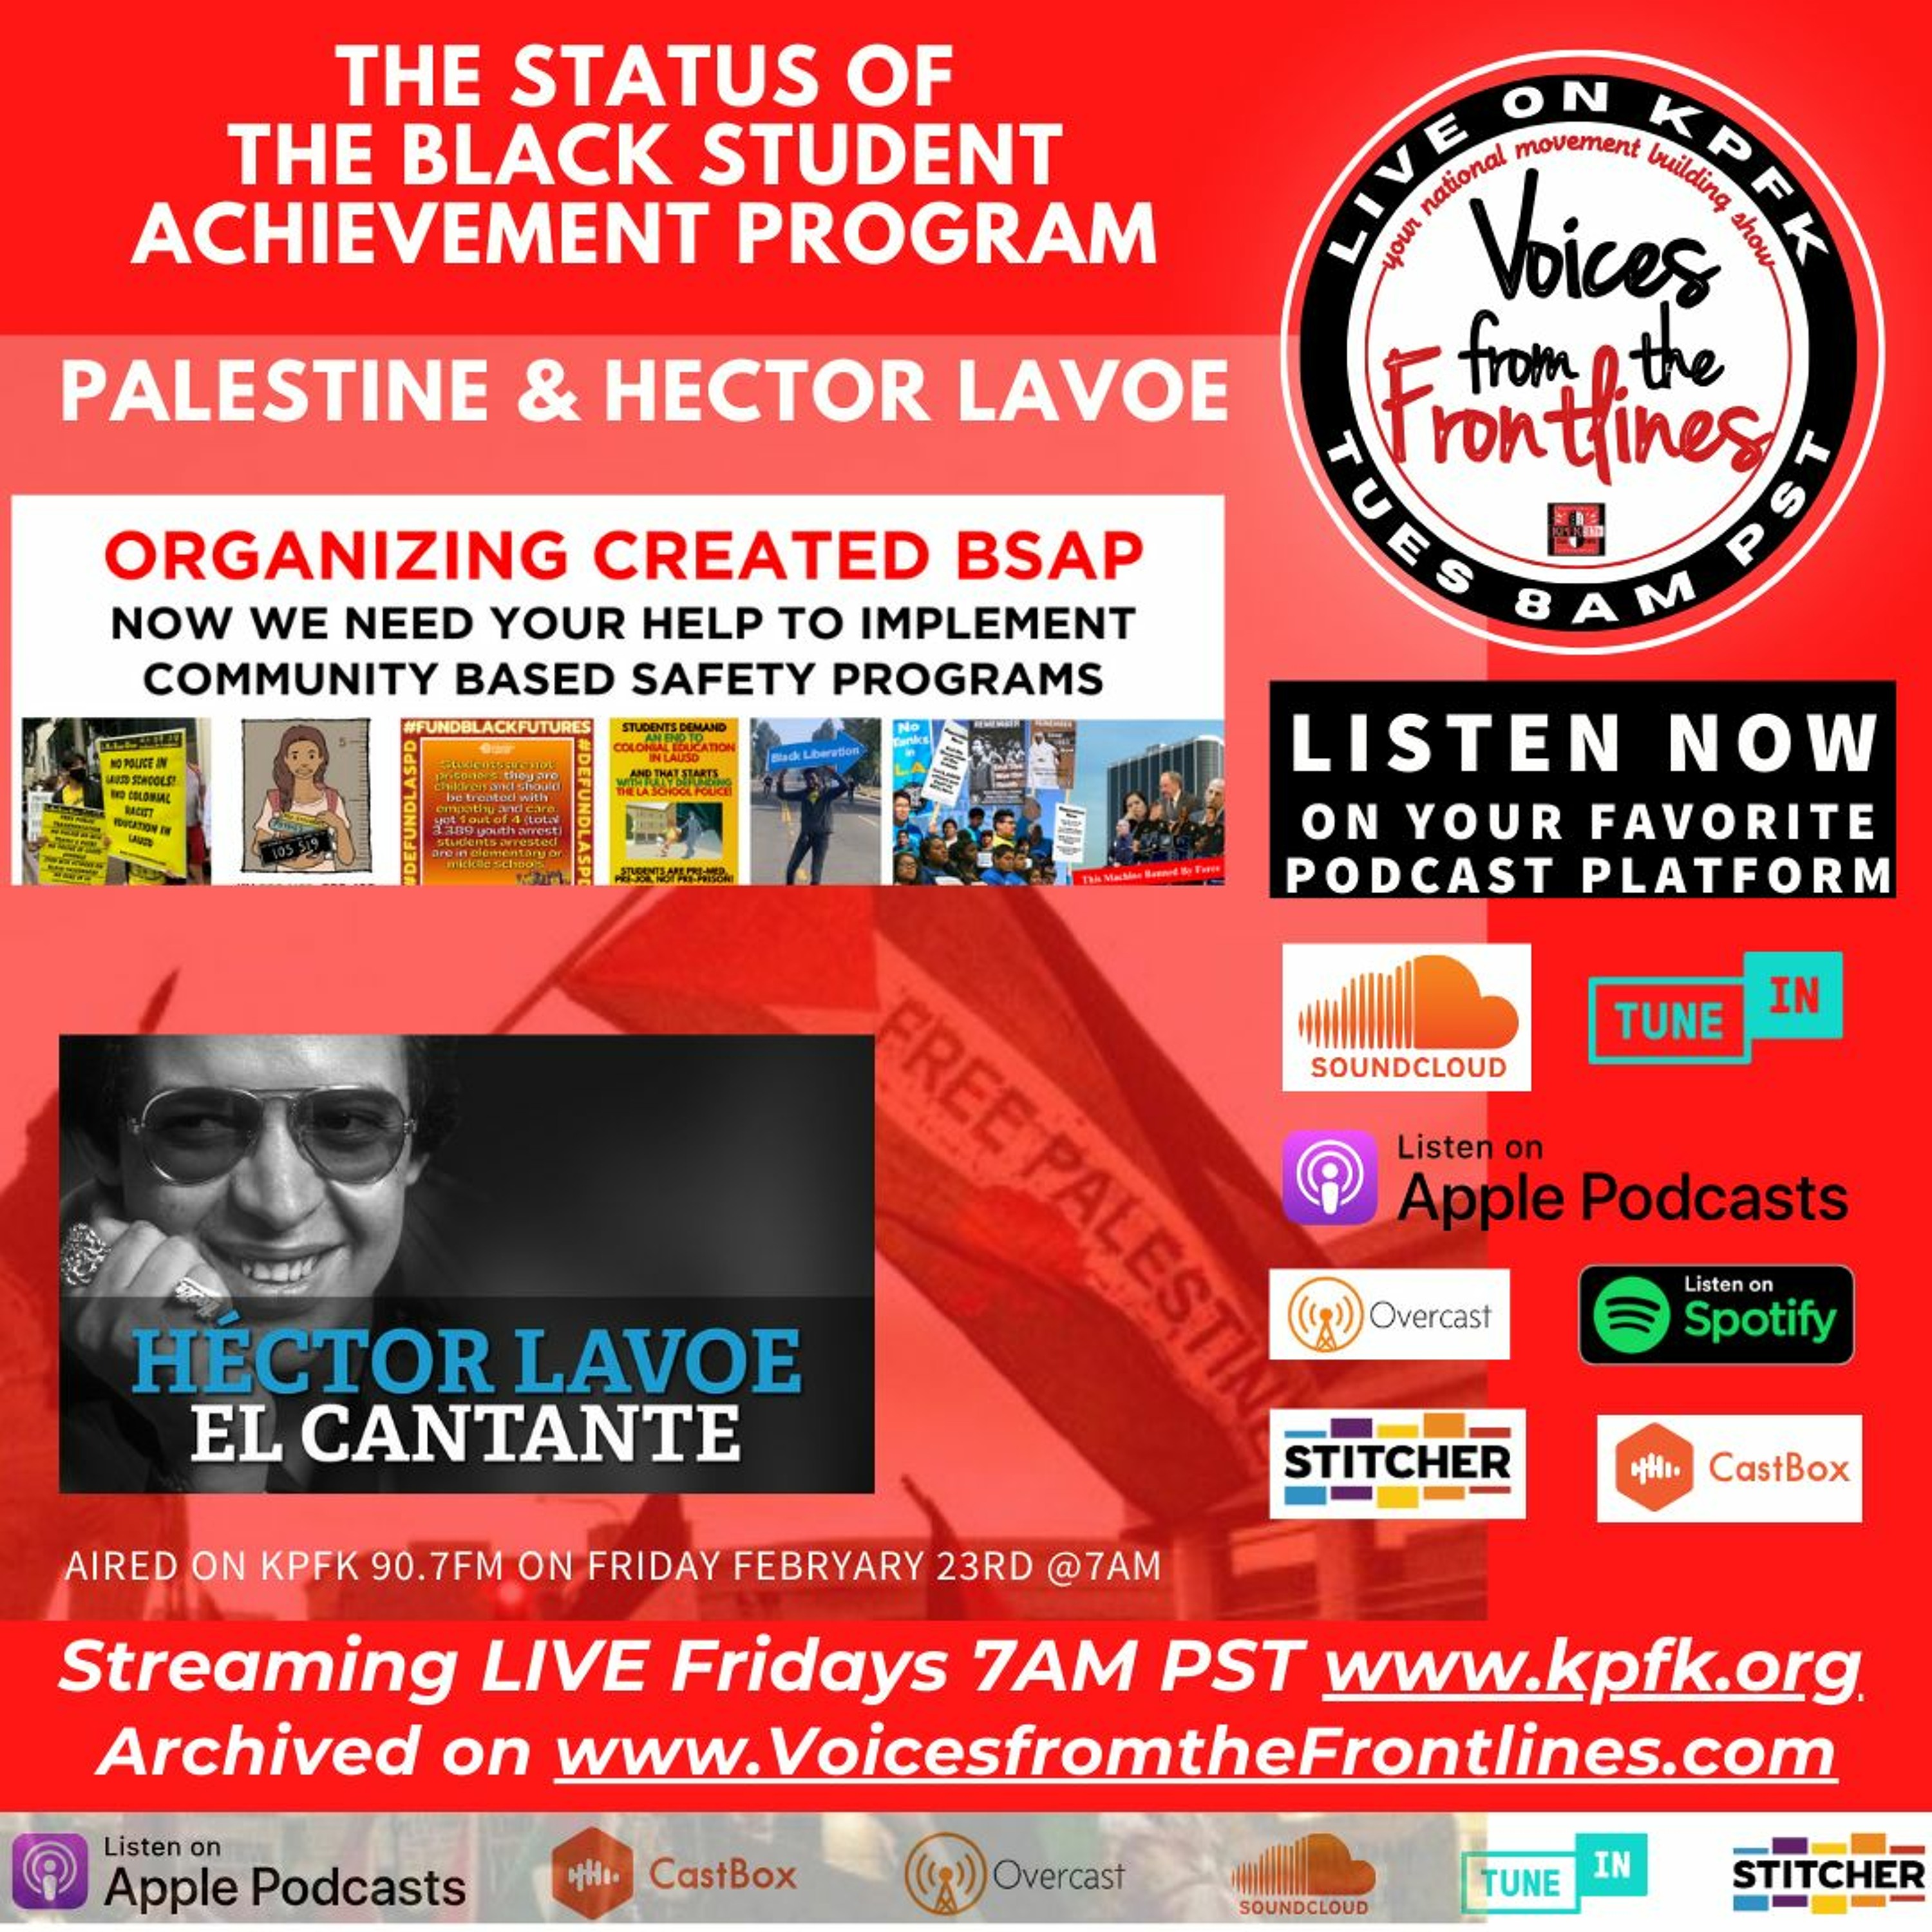 BSAP, Palestine, and Hector Lavoe